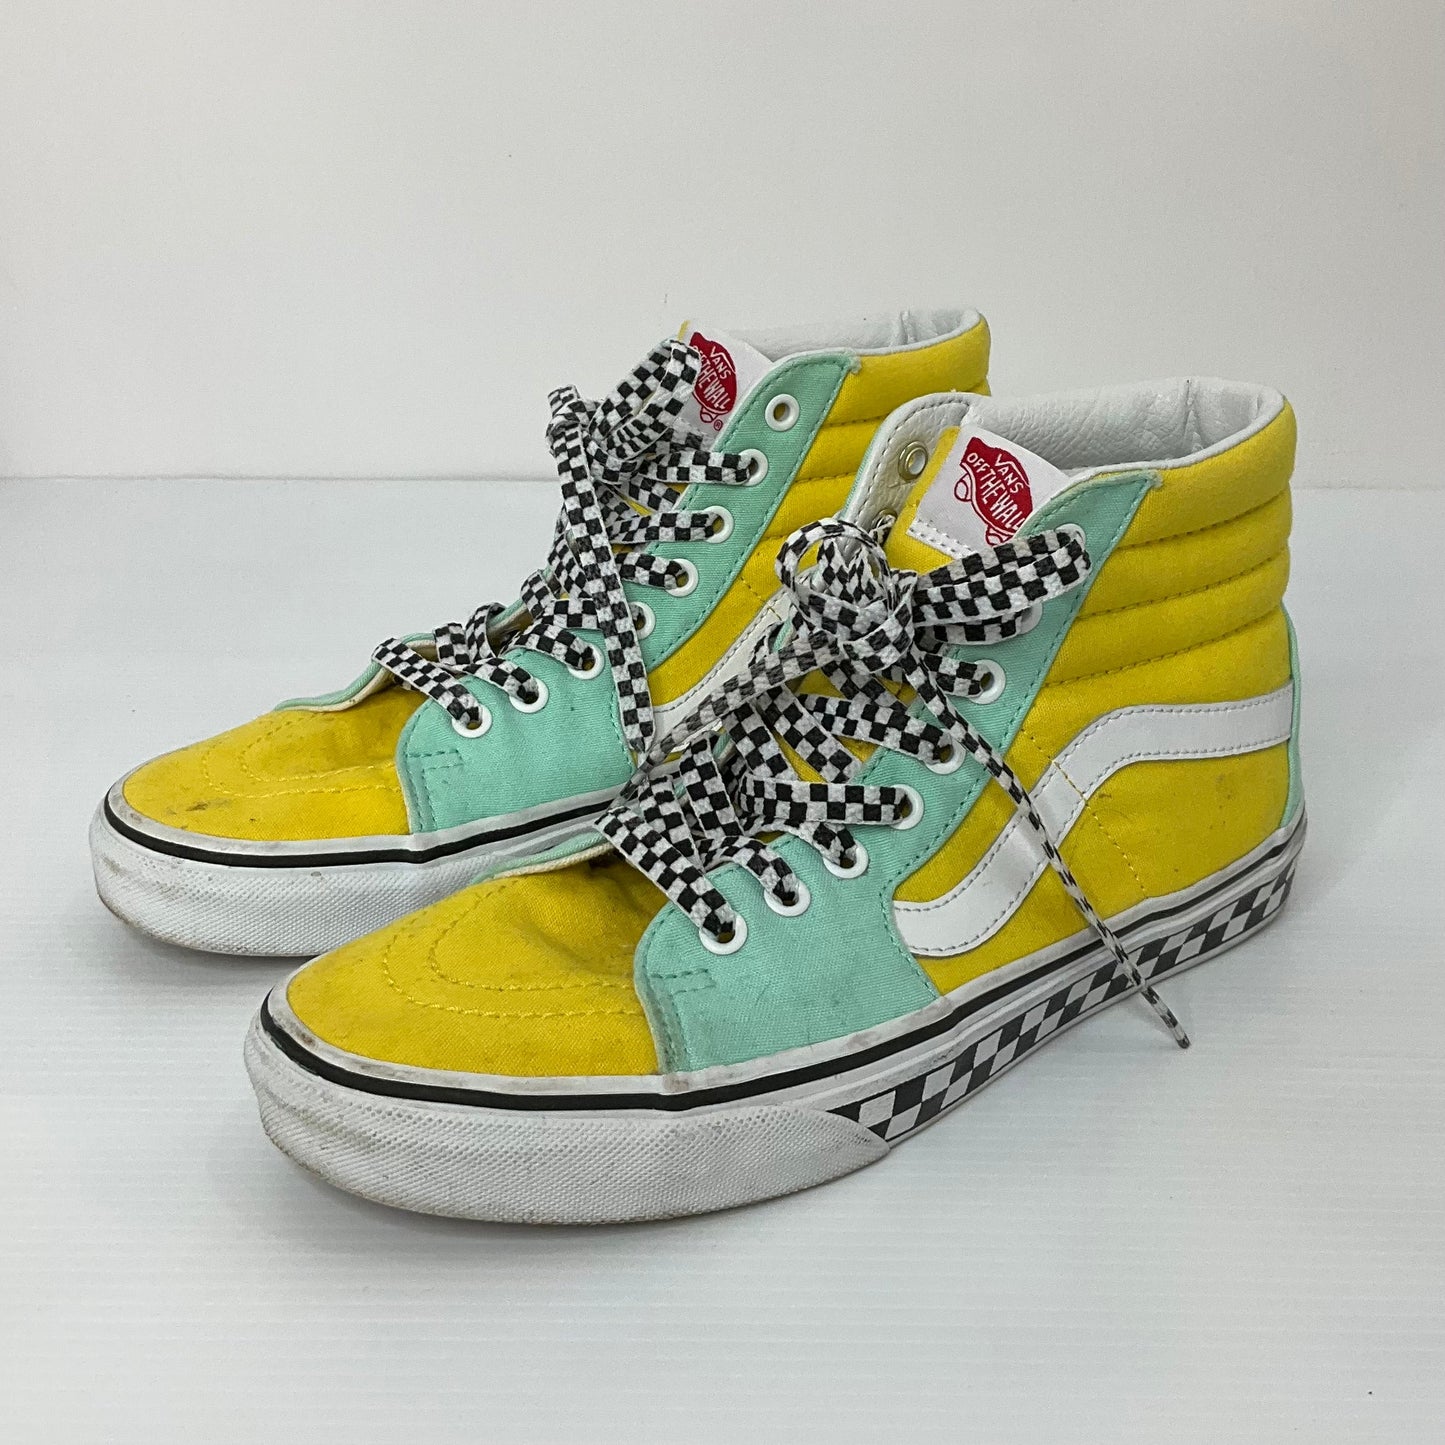 Multi-colored Shoes Sneakers Vans, Size 9.5